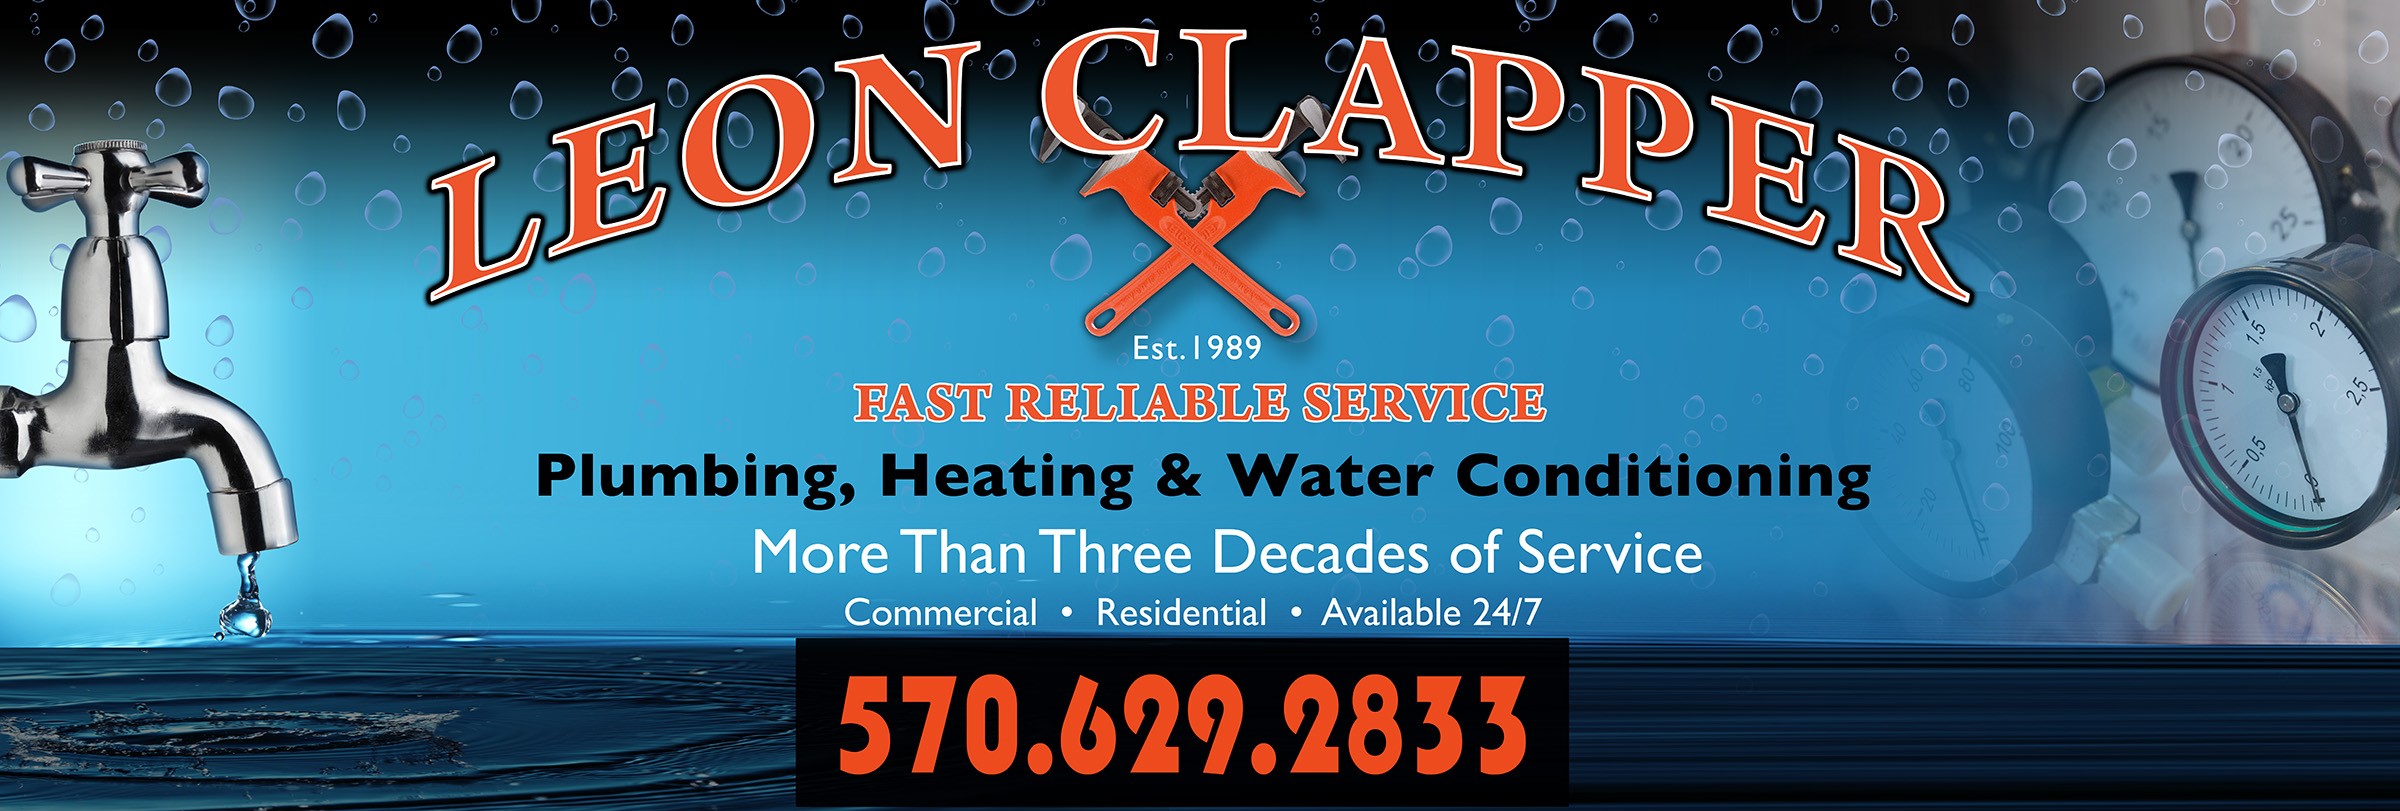 Leon Clapper Plumbing Heating and Water Conditioning